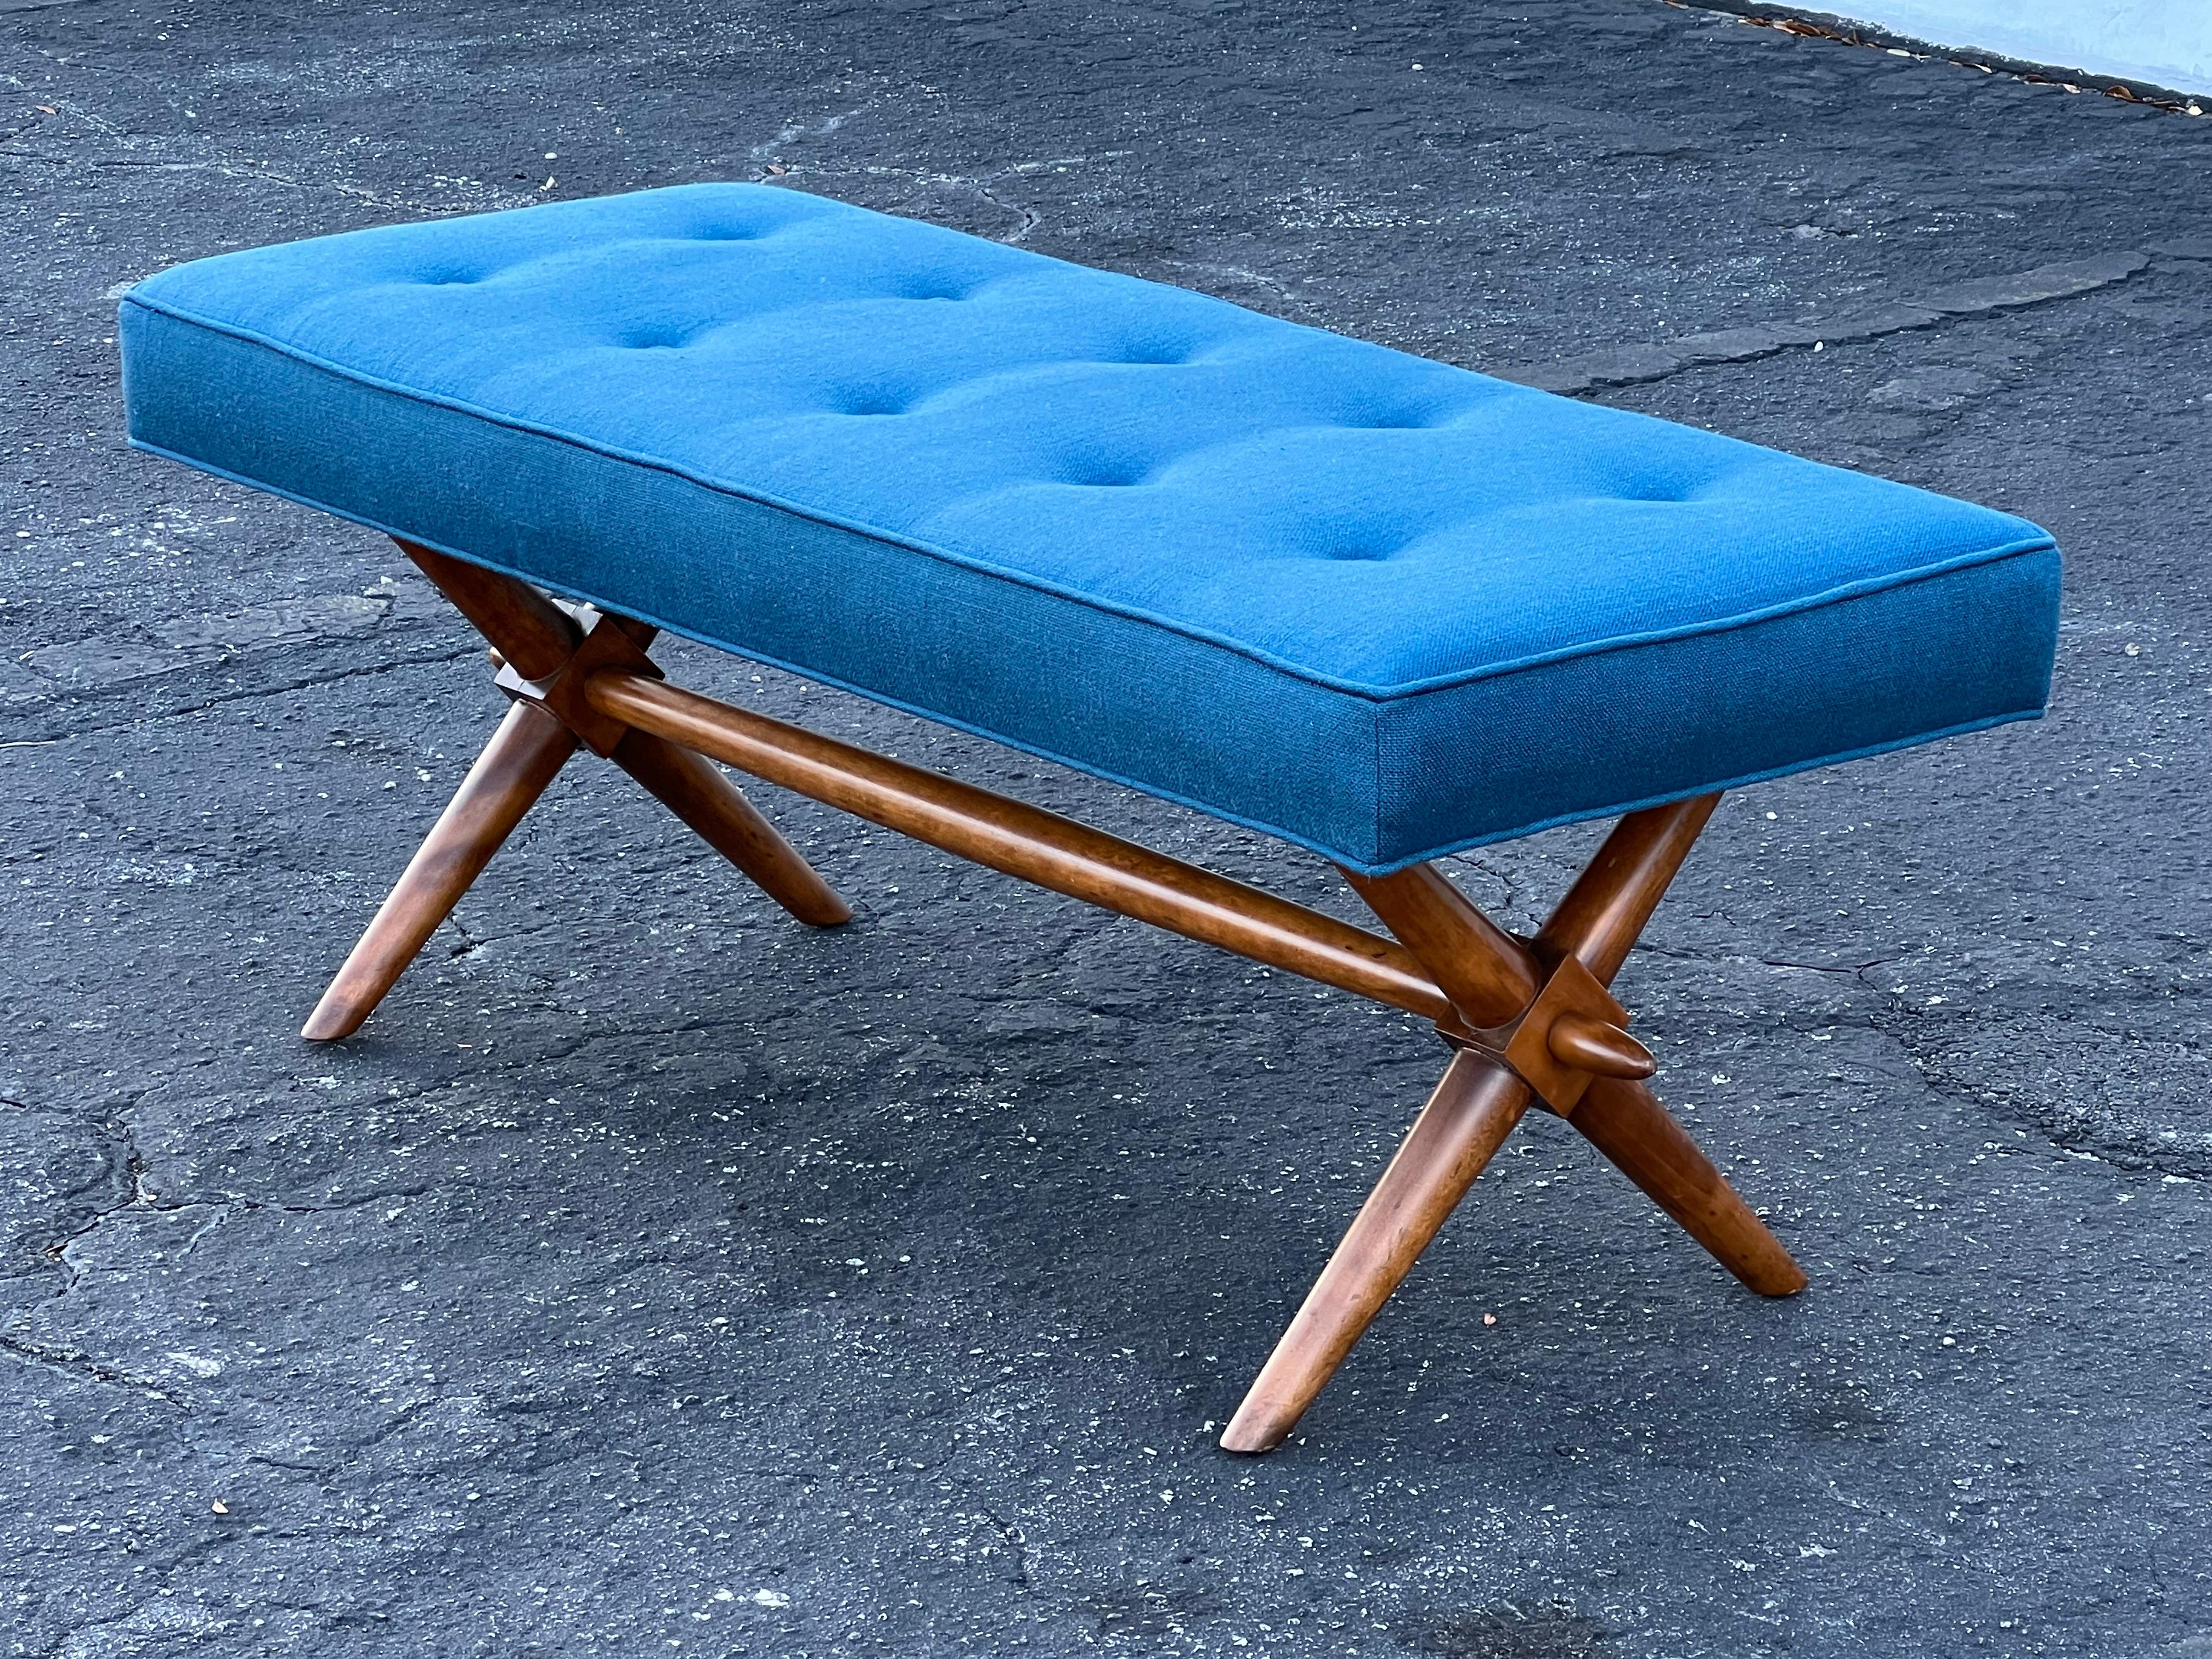 A classic upholstered bench by T.H. Robsjohn-Gibbings for Widdicomb. Feauturing an X form base. Walnut frame, upholstered in 100% Belgian linen by Brunschwig & Fils, 